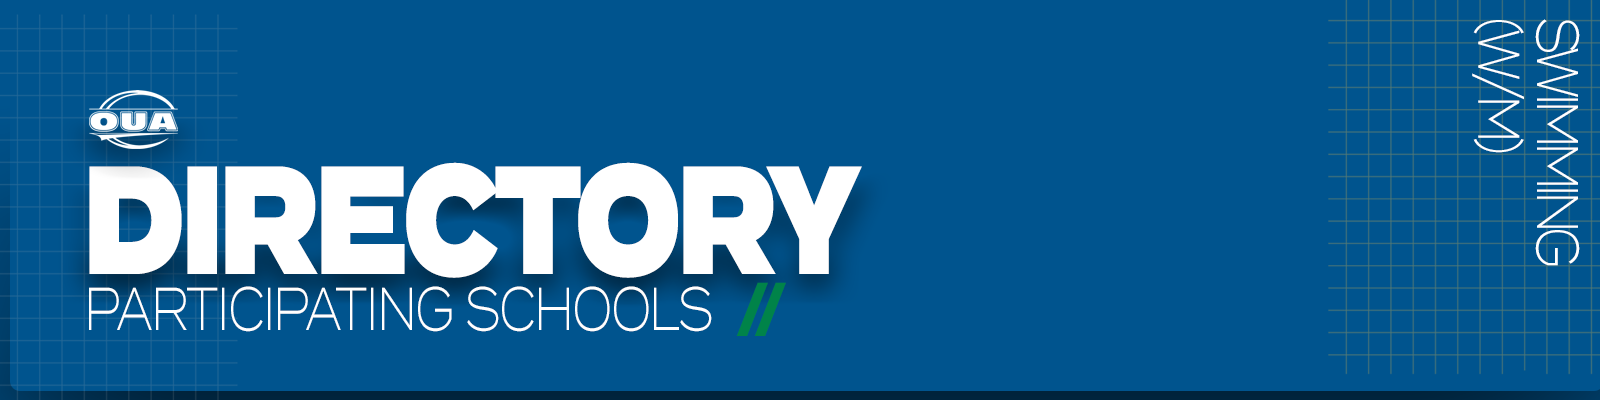 Predominantly blue graphic with large white text on the left side that reads 'Directory, Participating Schools' and small white vertical text on the right side that reads 'Swimming'